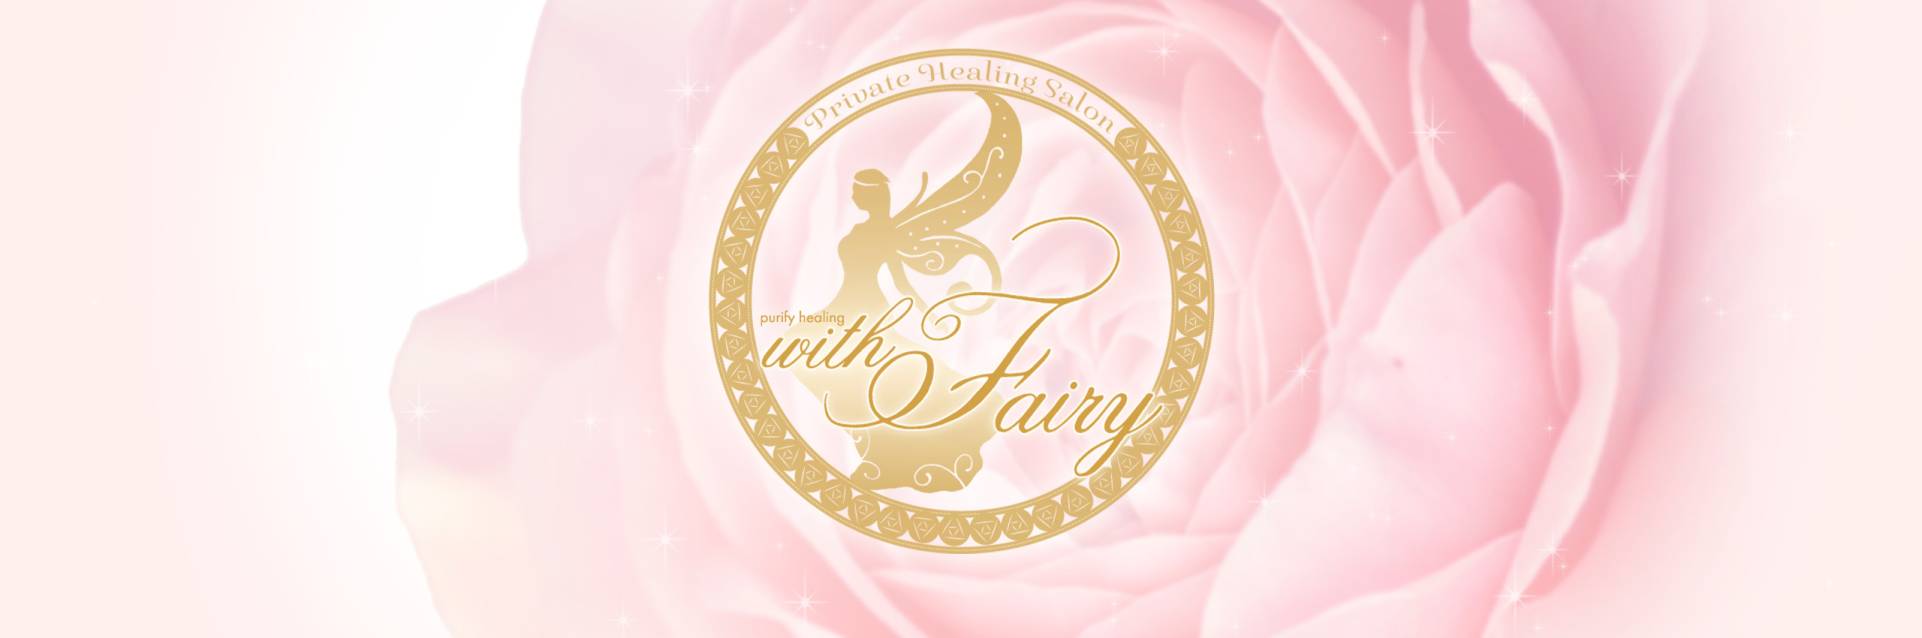 Private Hearling Salon withFairy